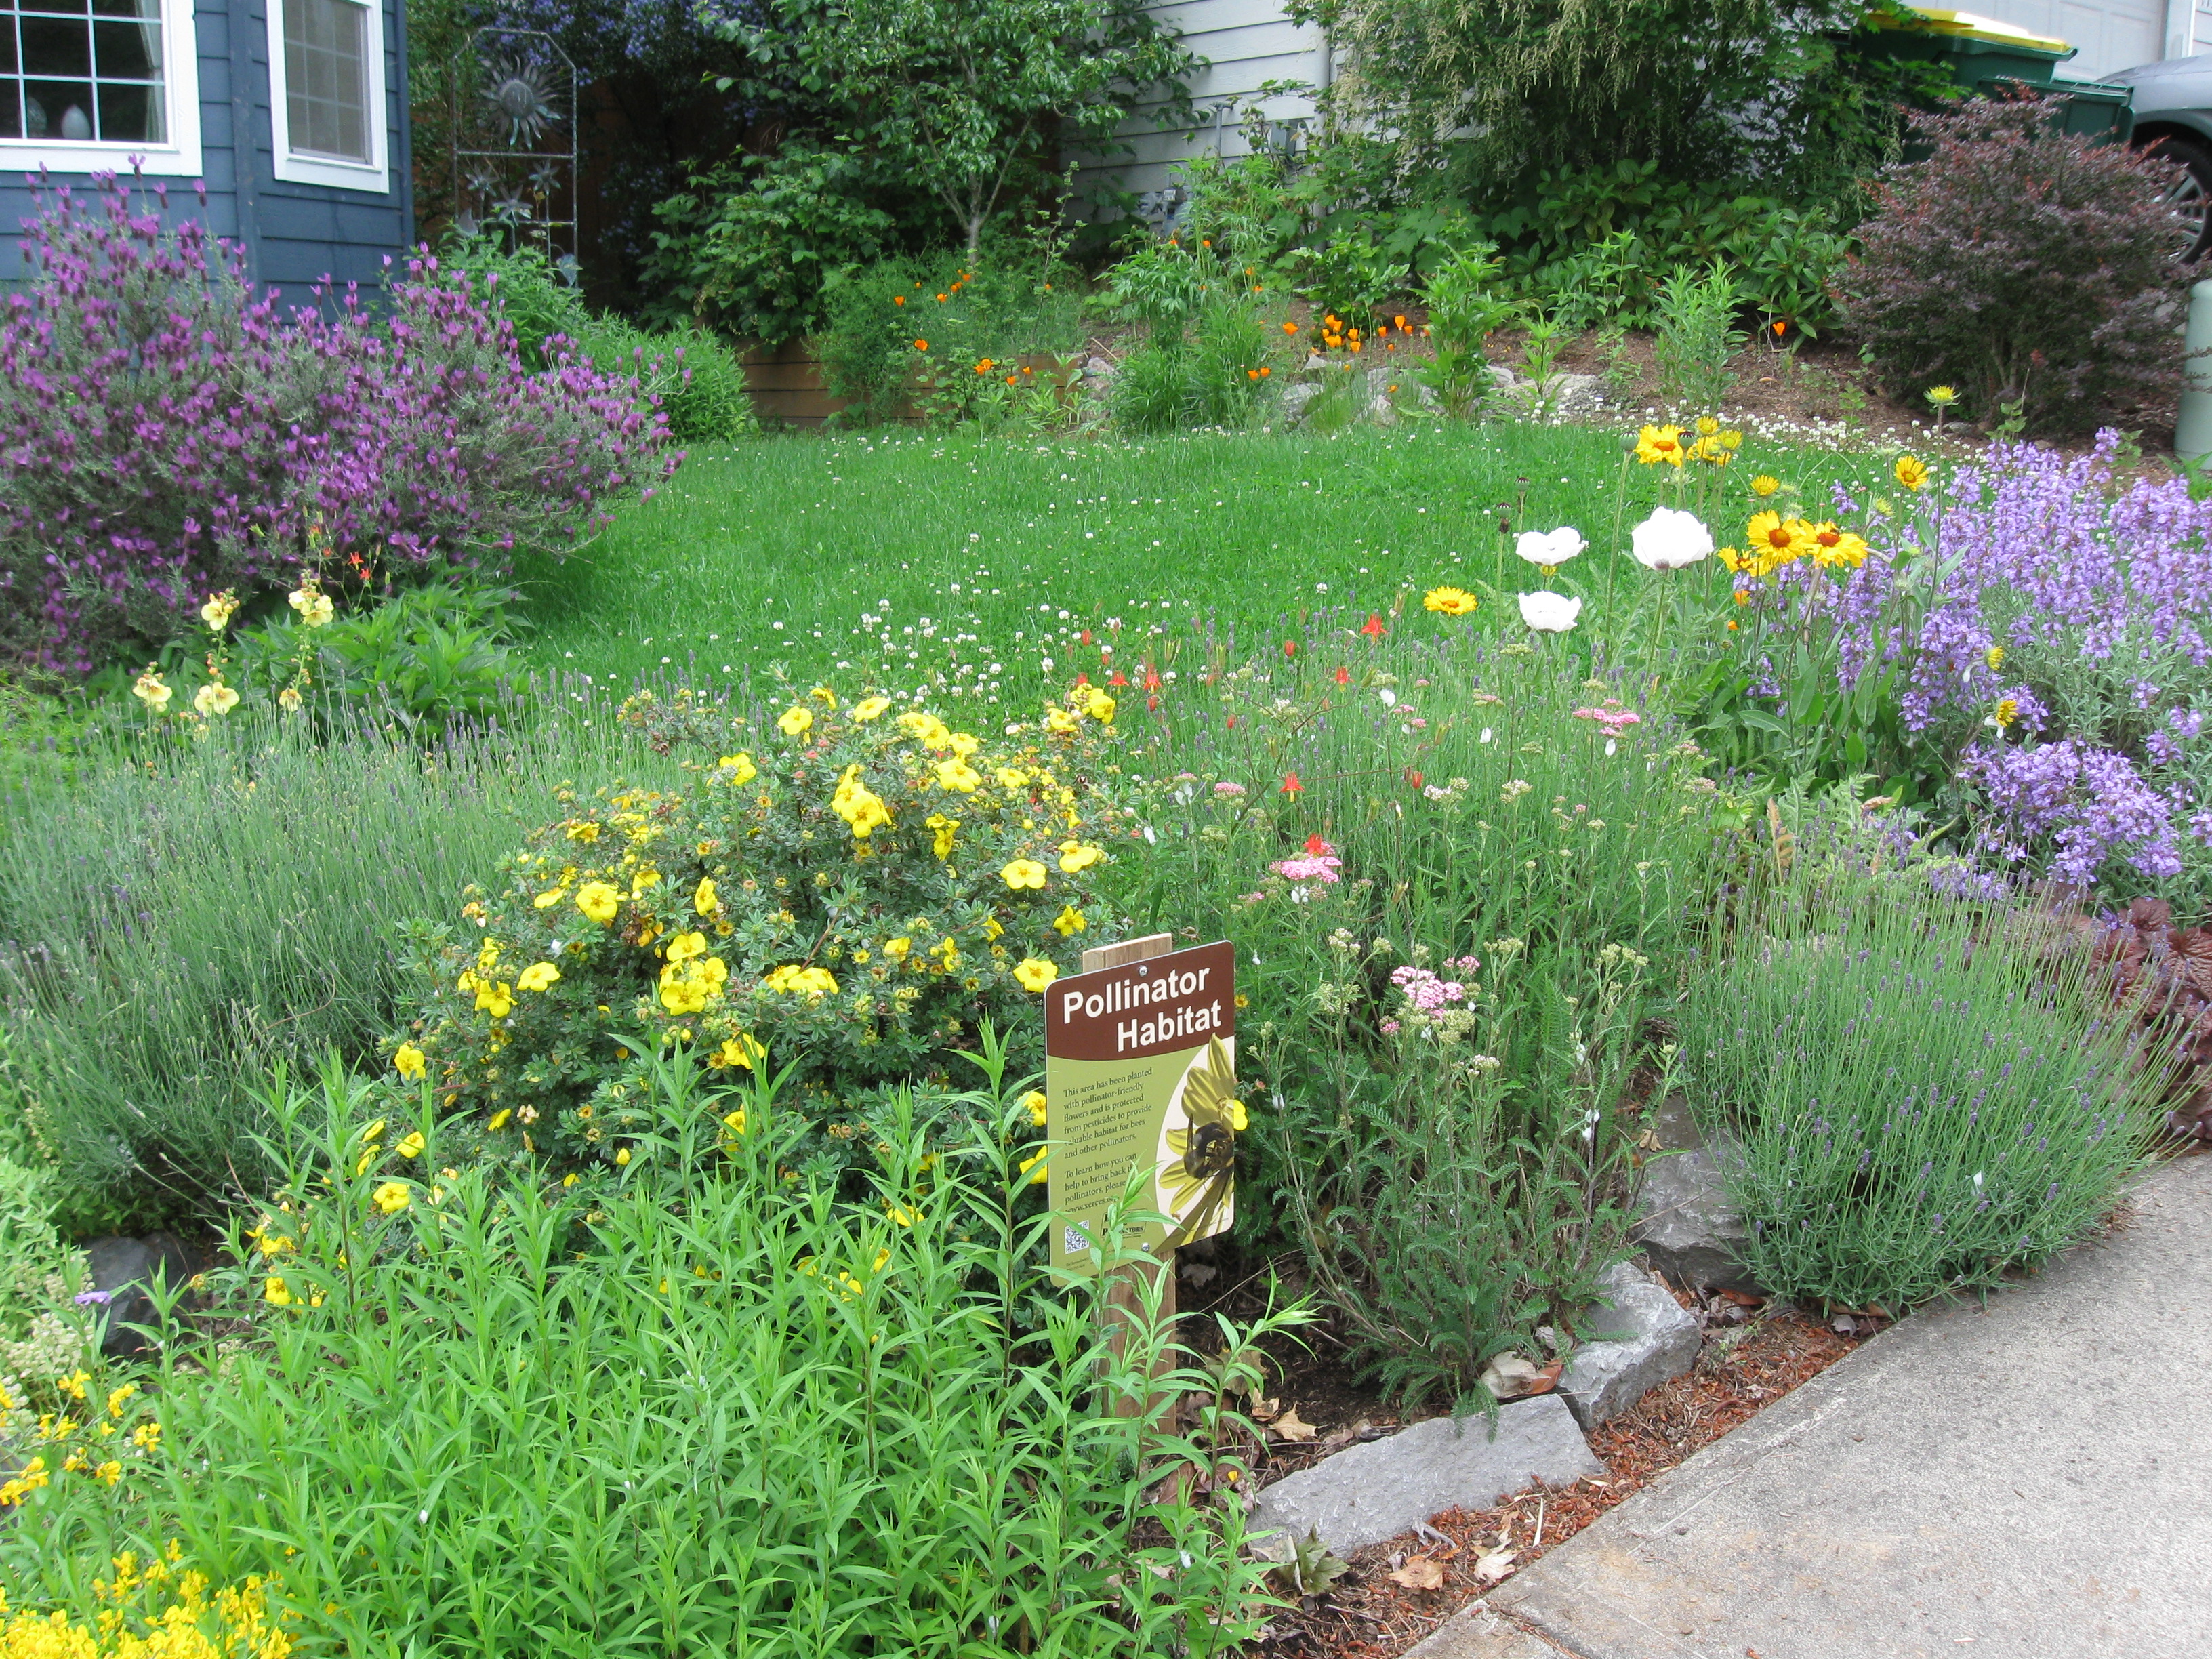 A pollinator habitat sign standing among an abundance of flowers in a suburban front yard.